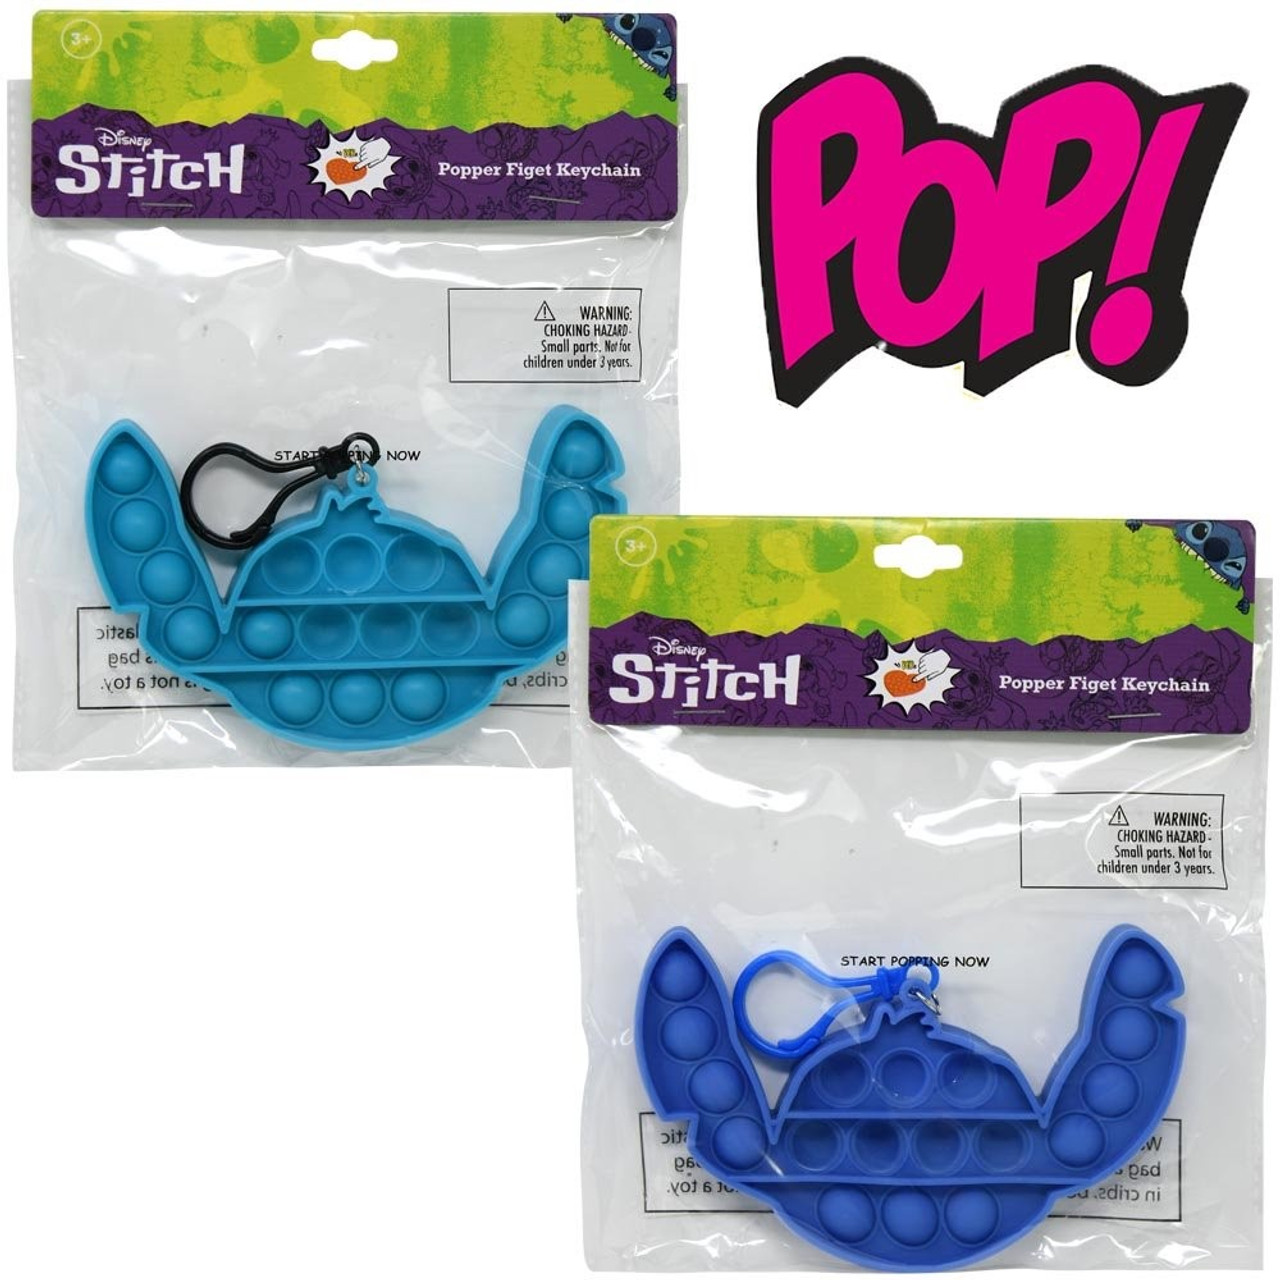 Giggle Time Bubble Push Poppers - 2 Pack - Sensory Fidget Toys - Relieves  Stress & Anxiety, Autism ADHD Fidget Toys for Kids and Adults, Silicone